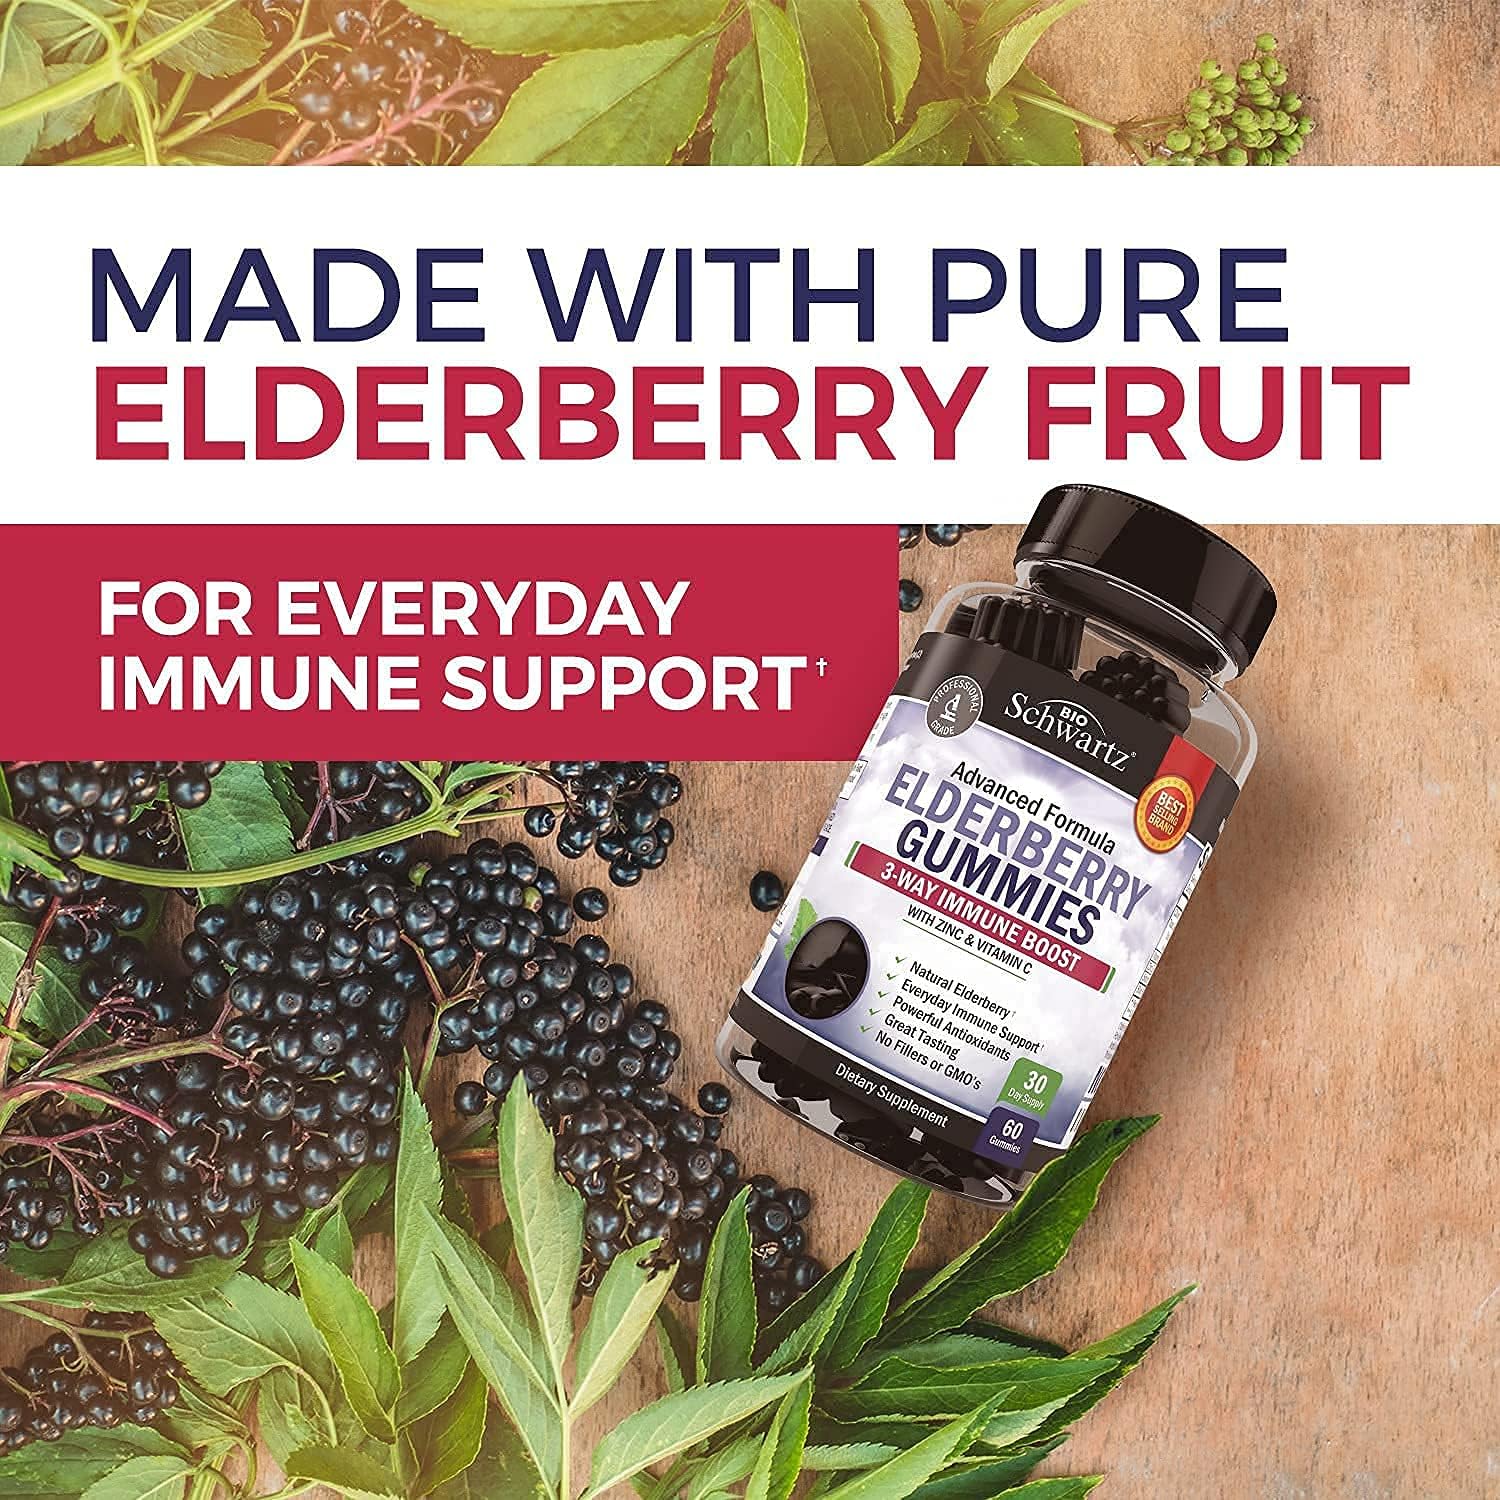 Elderberry Gummies With Zinc And Vitamin C For Adults  Kids - Natural Immune Support - Black Sambucus Elderberries - Powerful Multiminerals Supplement - Gluten-Free, Non-Gmo, Made In Usa, 60 Ct